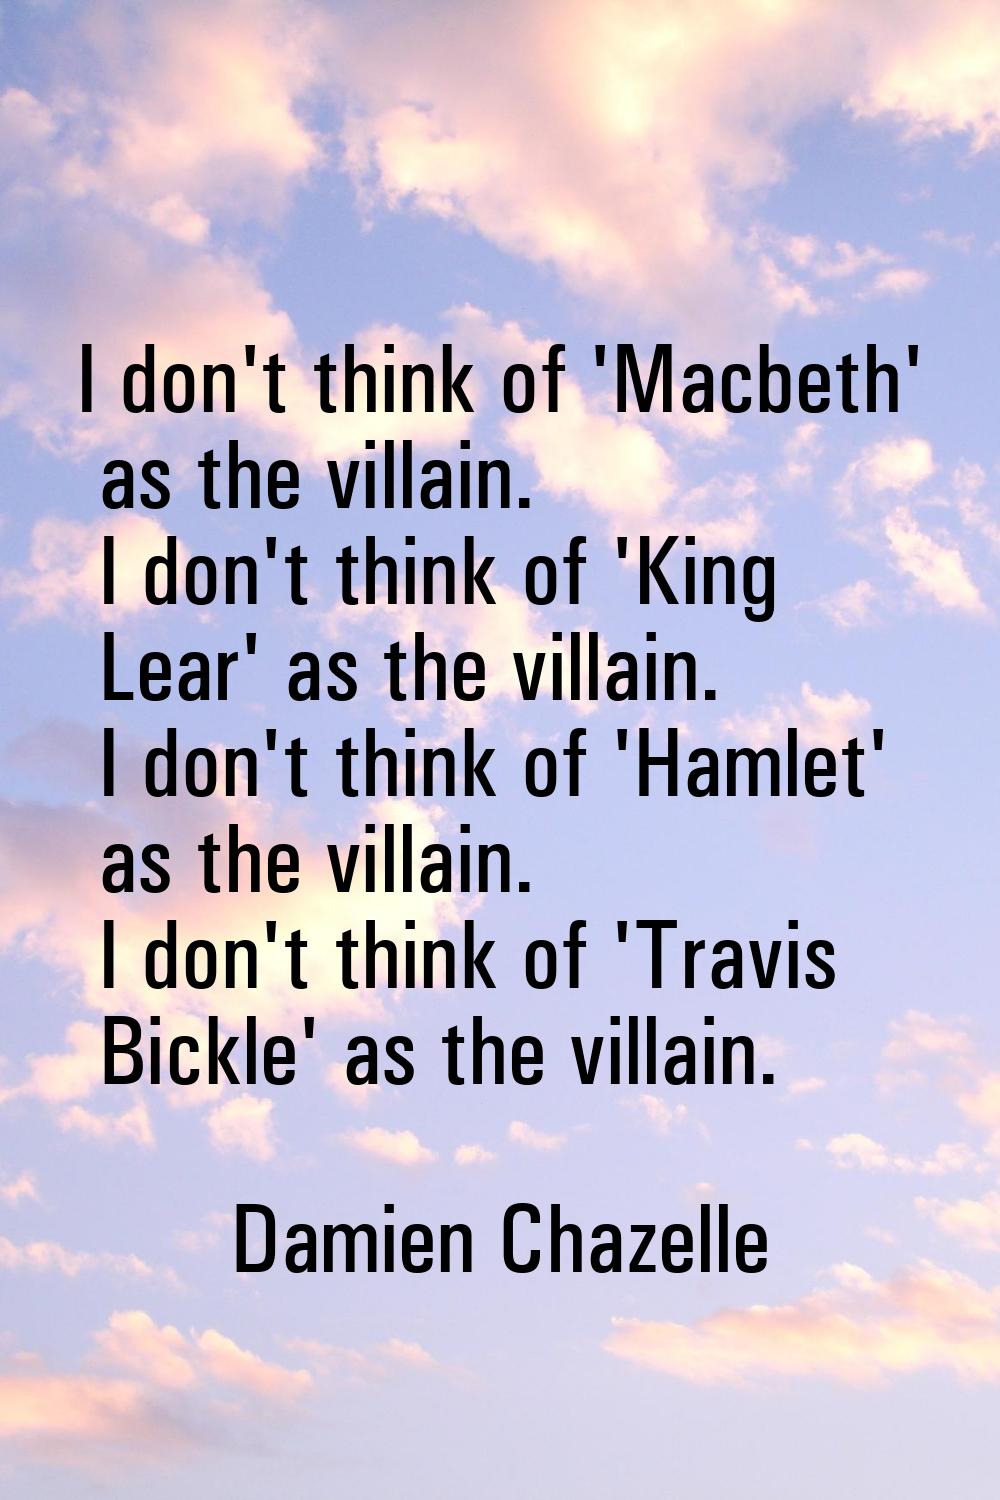 I don't think of 'Macbeth' as the villain. I don't think of 'King Lear' as the villain. I don't thi